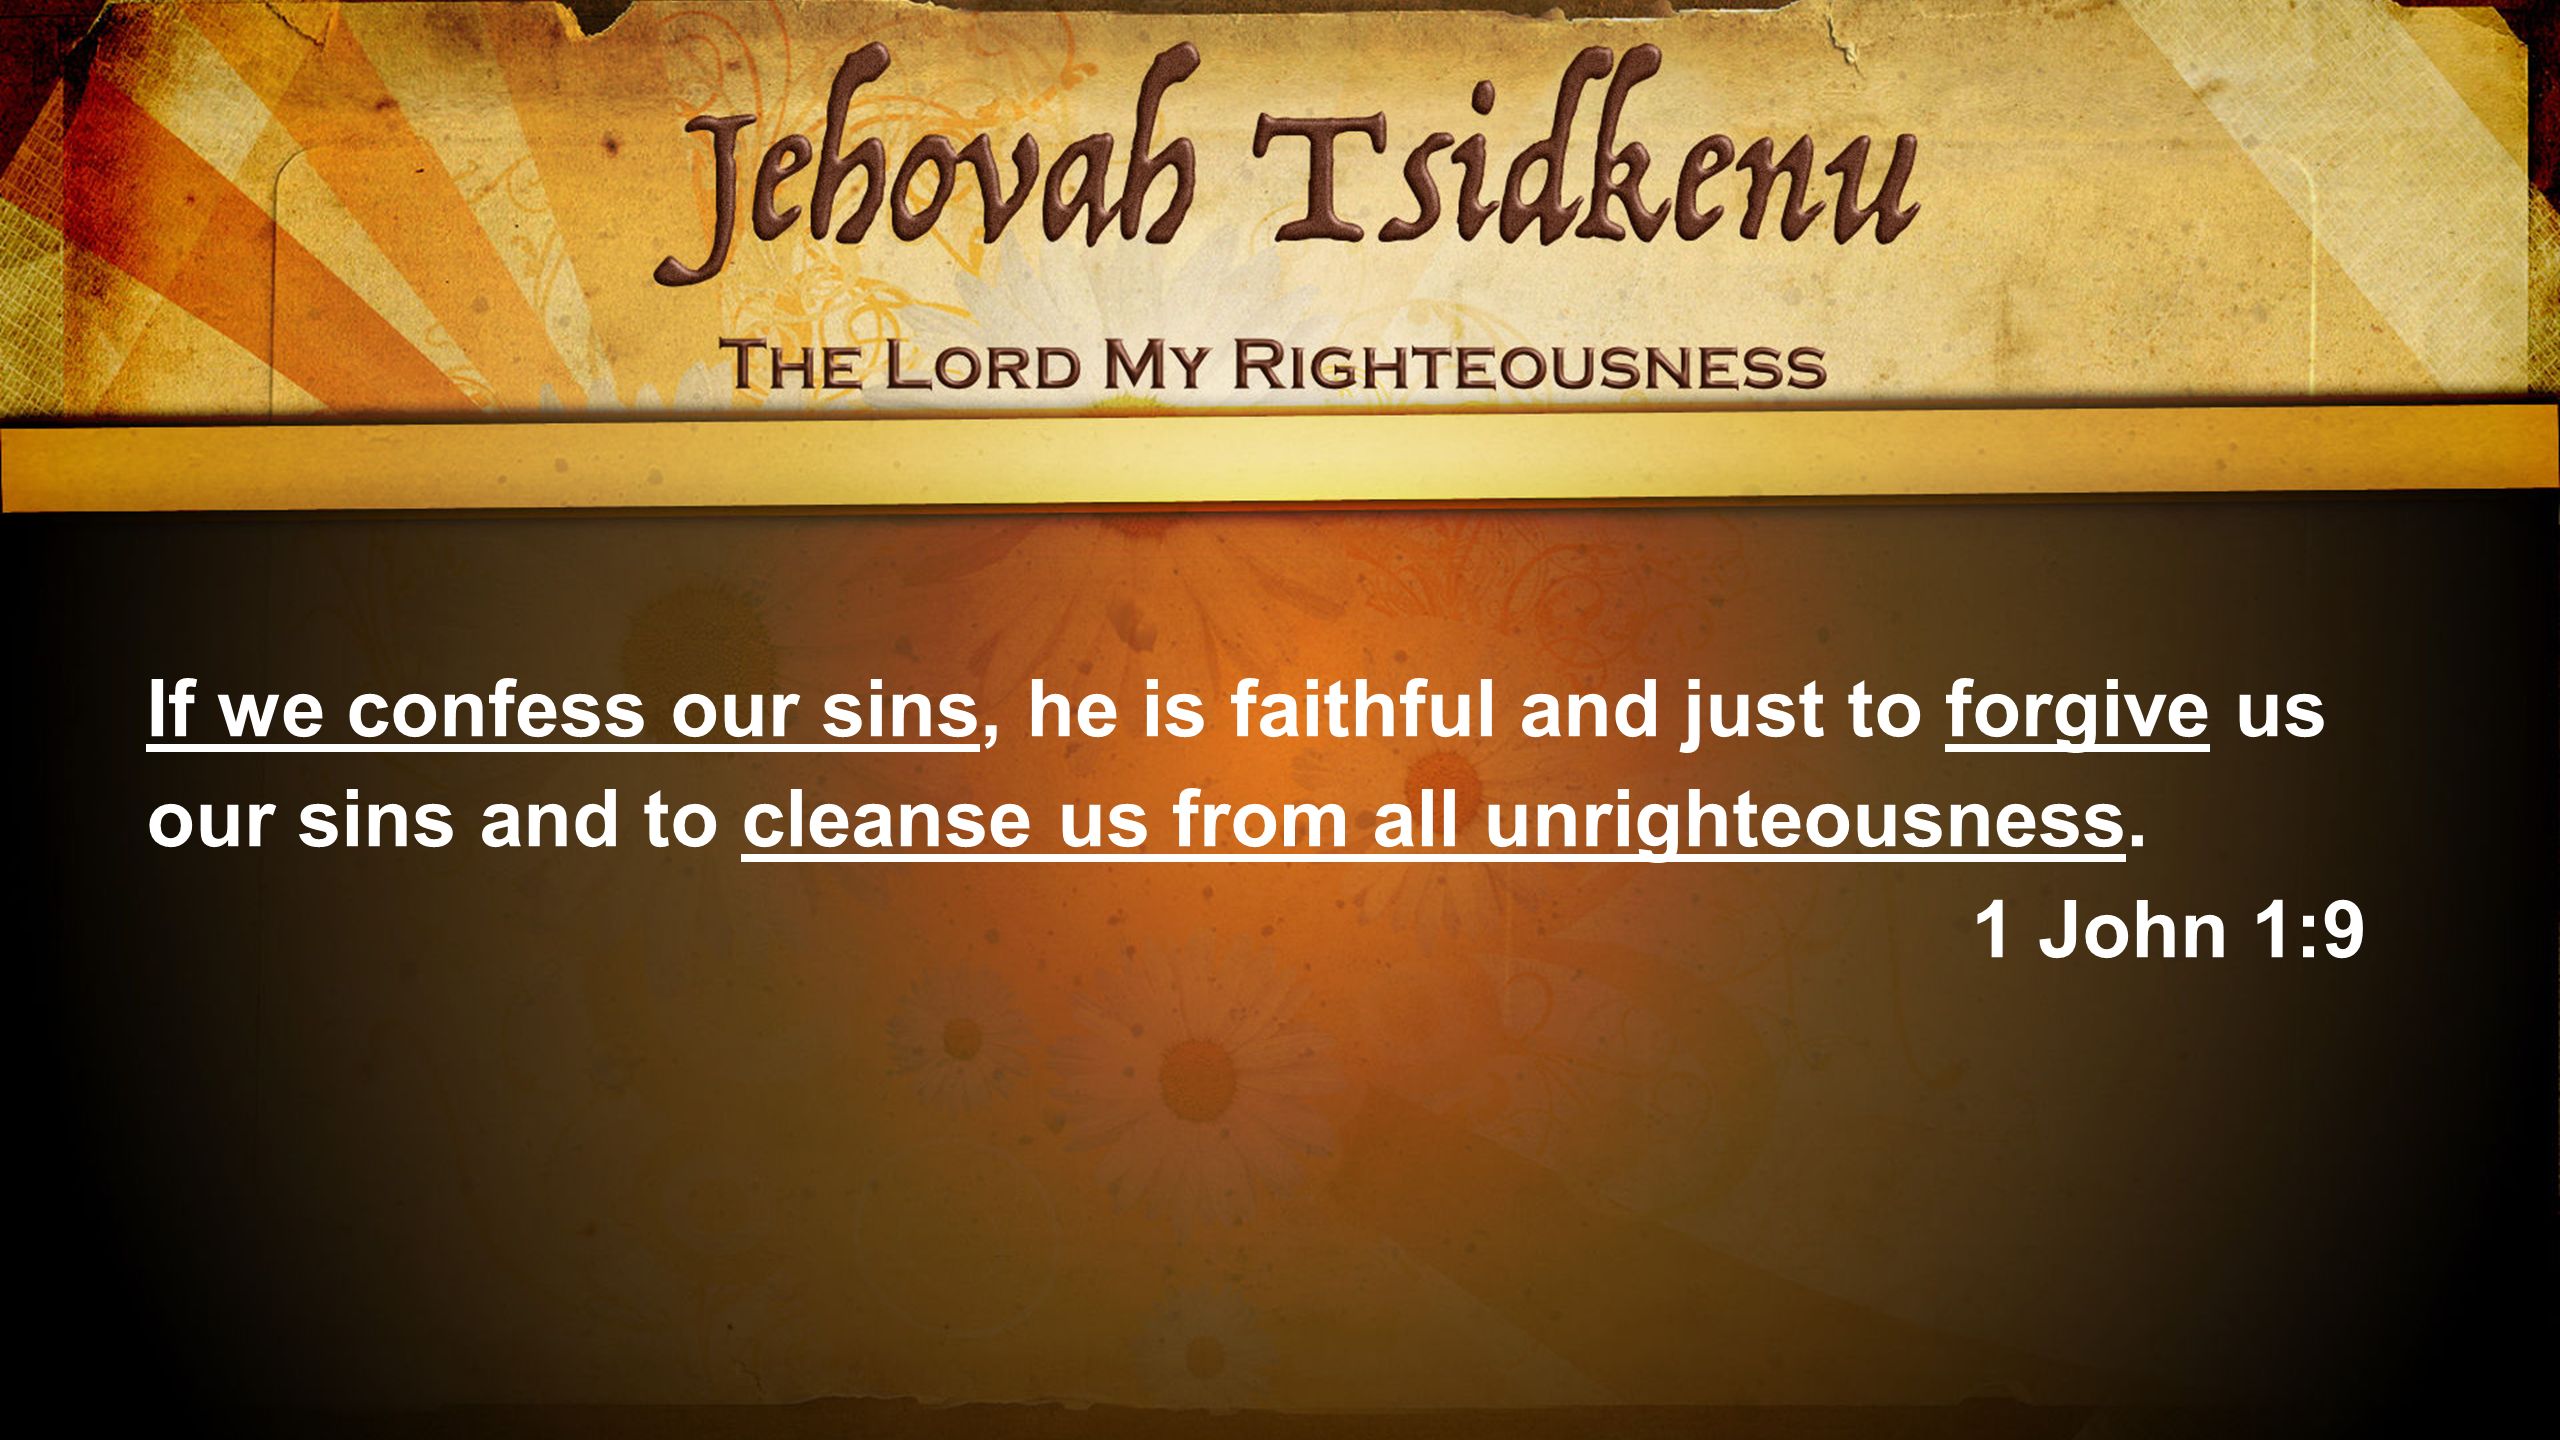 If we confess our sins, he is faithful and just to forgive us our sins and to cleanse us from all unrighteousness.